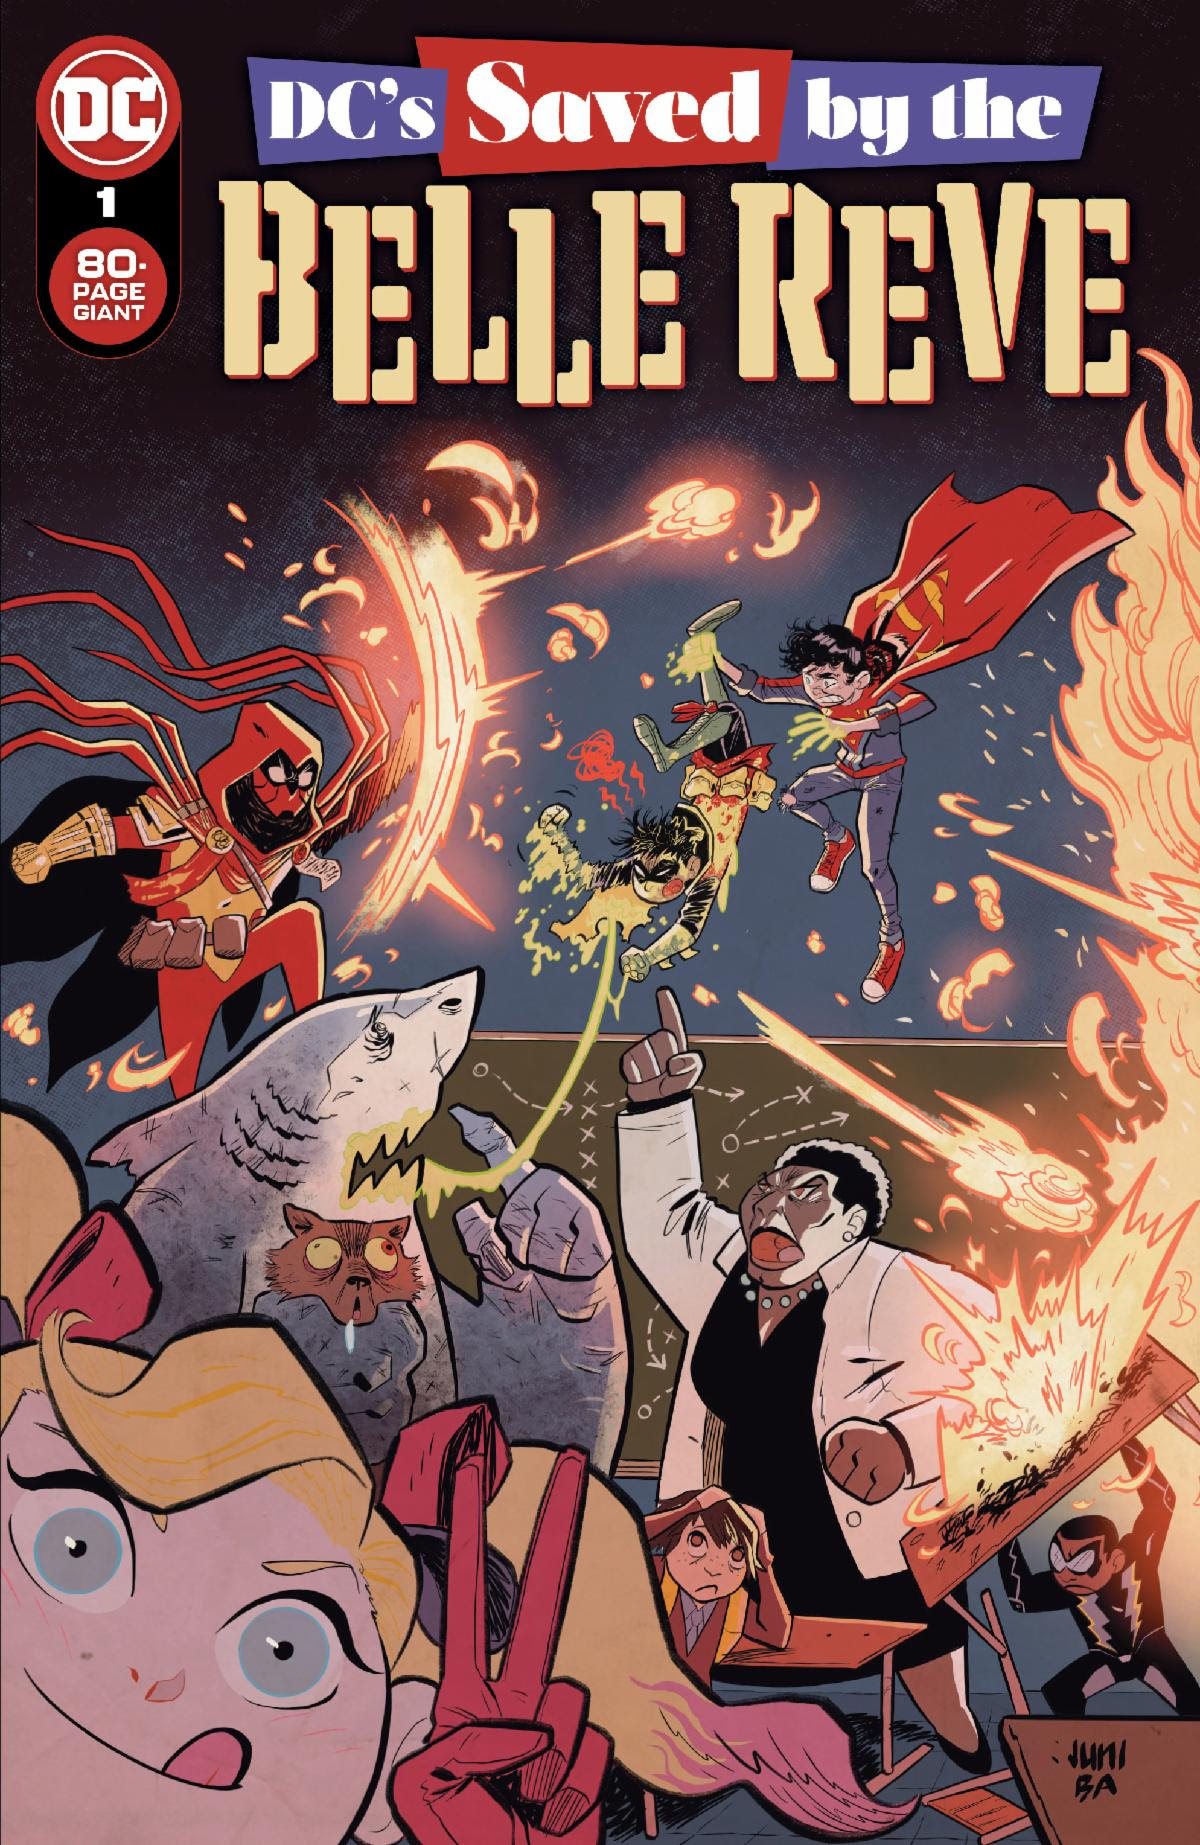 DC Saved by the Belle Reve #1 (One-Shot) Cover A Juni Ba